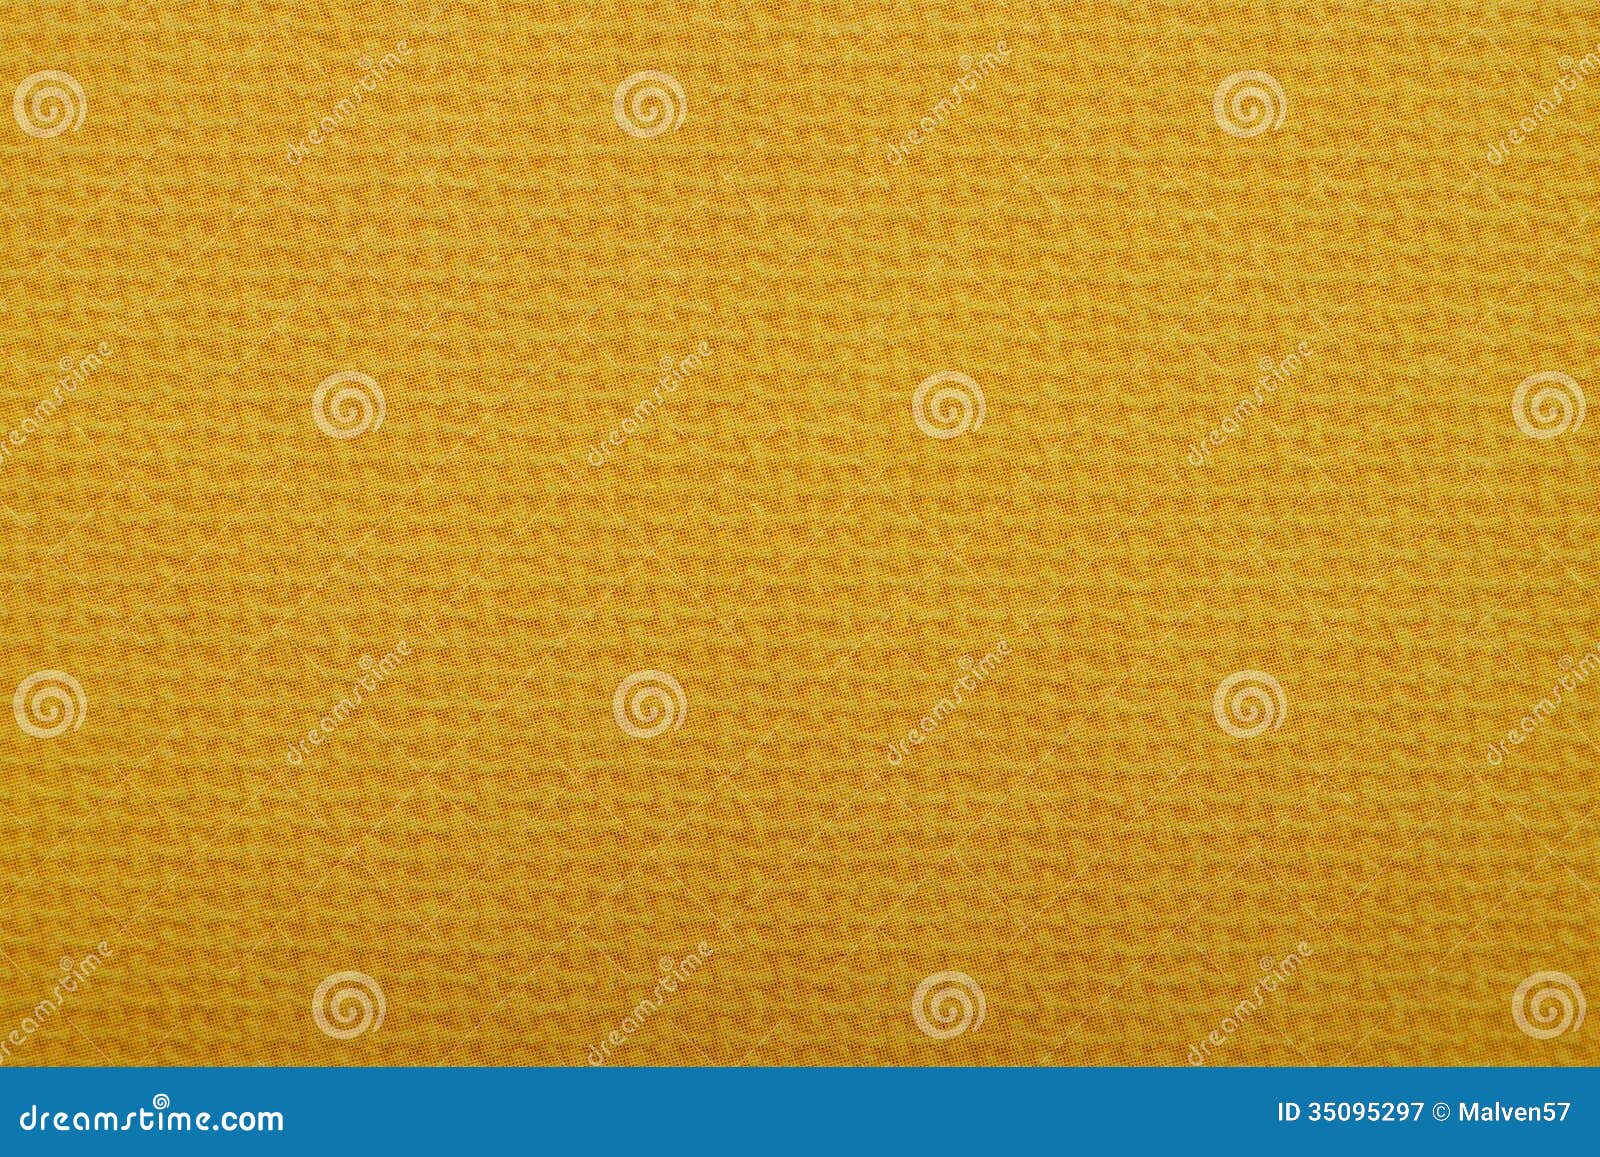 Texture of a Spotty Paper Surface Stock Image - Image of mesh, closeup ...